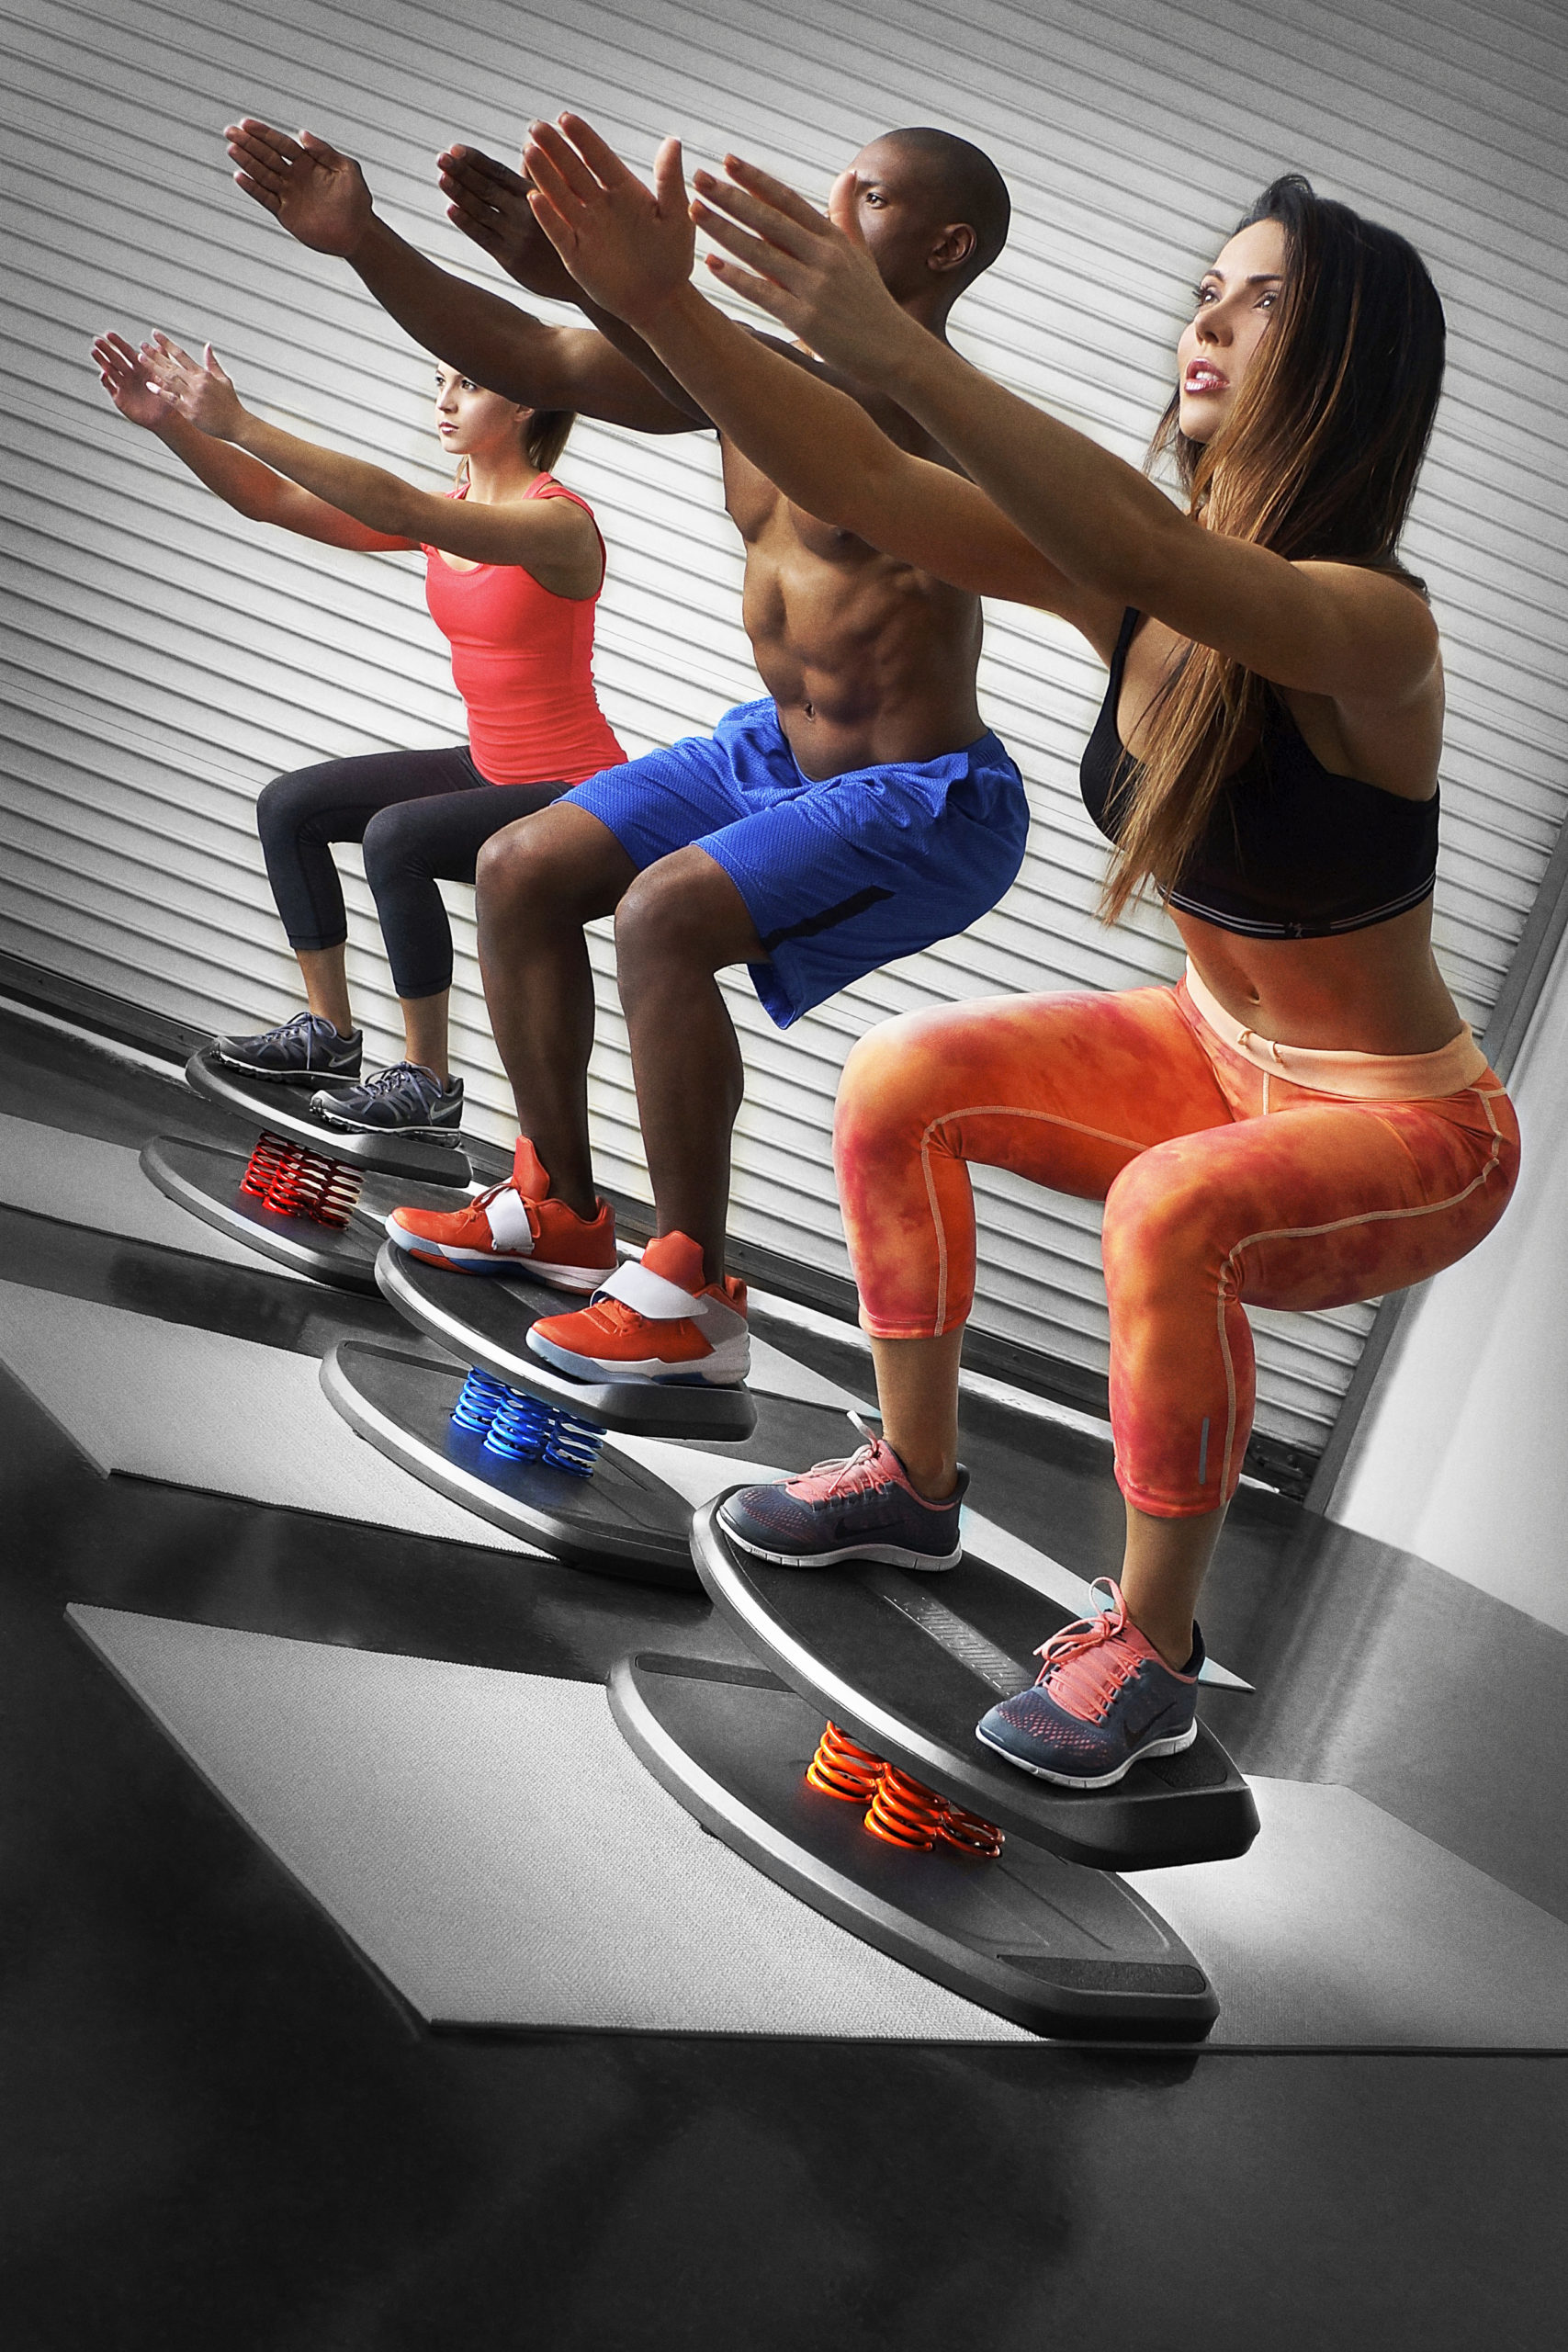 The Best Balance Boards for Workouts - Men's Stability Tools